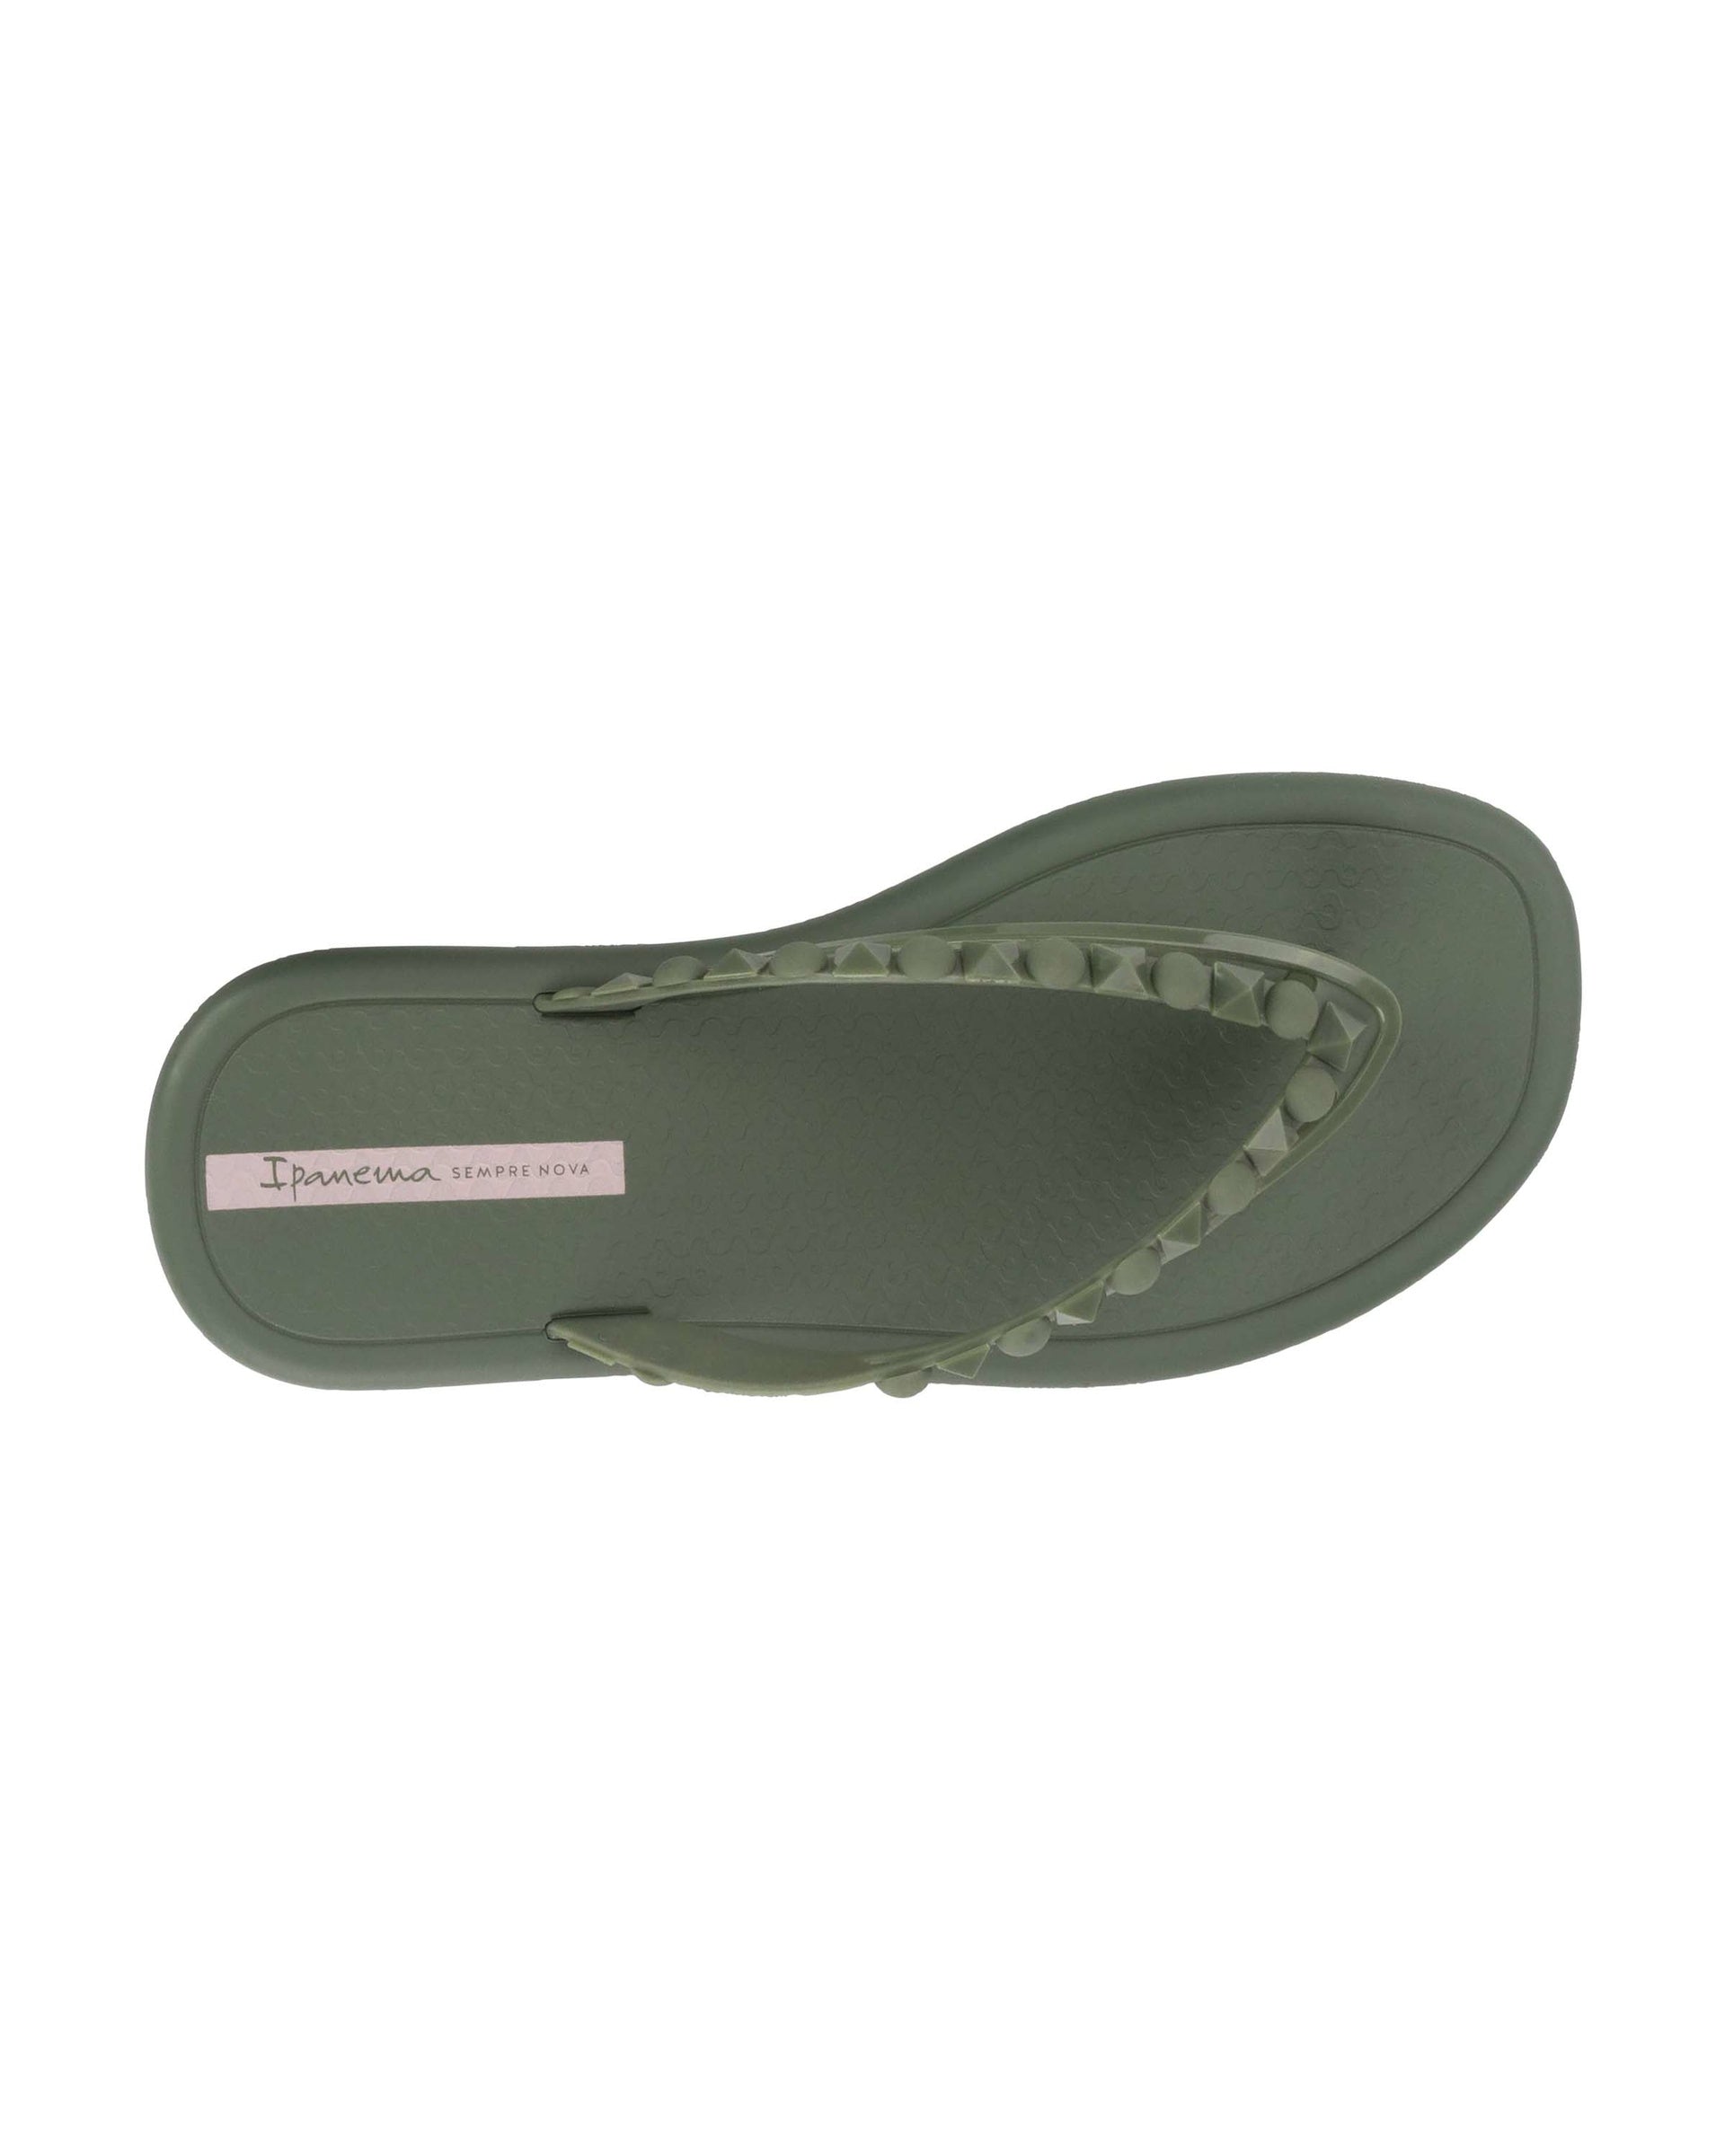 Top view of a green Ipanema Meu Sol women's flip flop with stud details on strap.